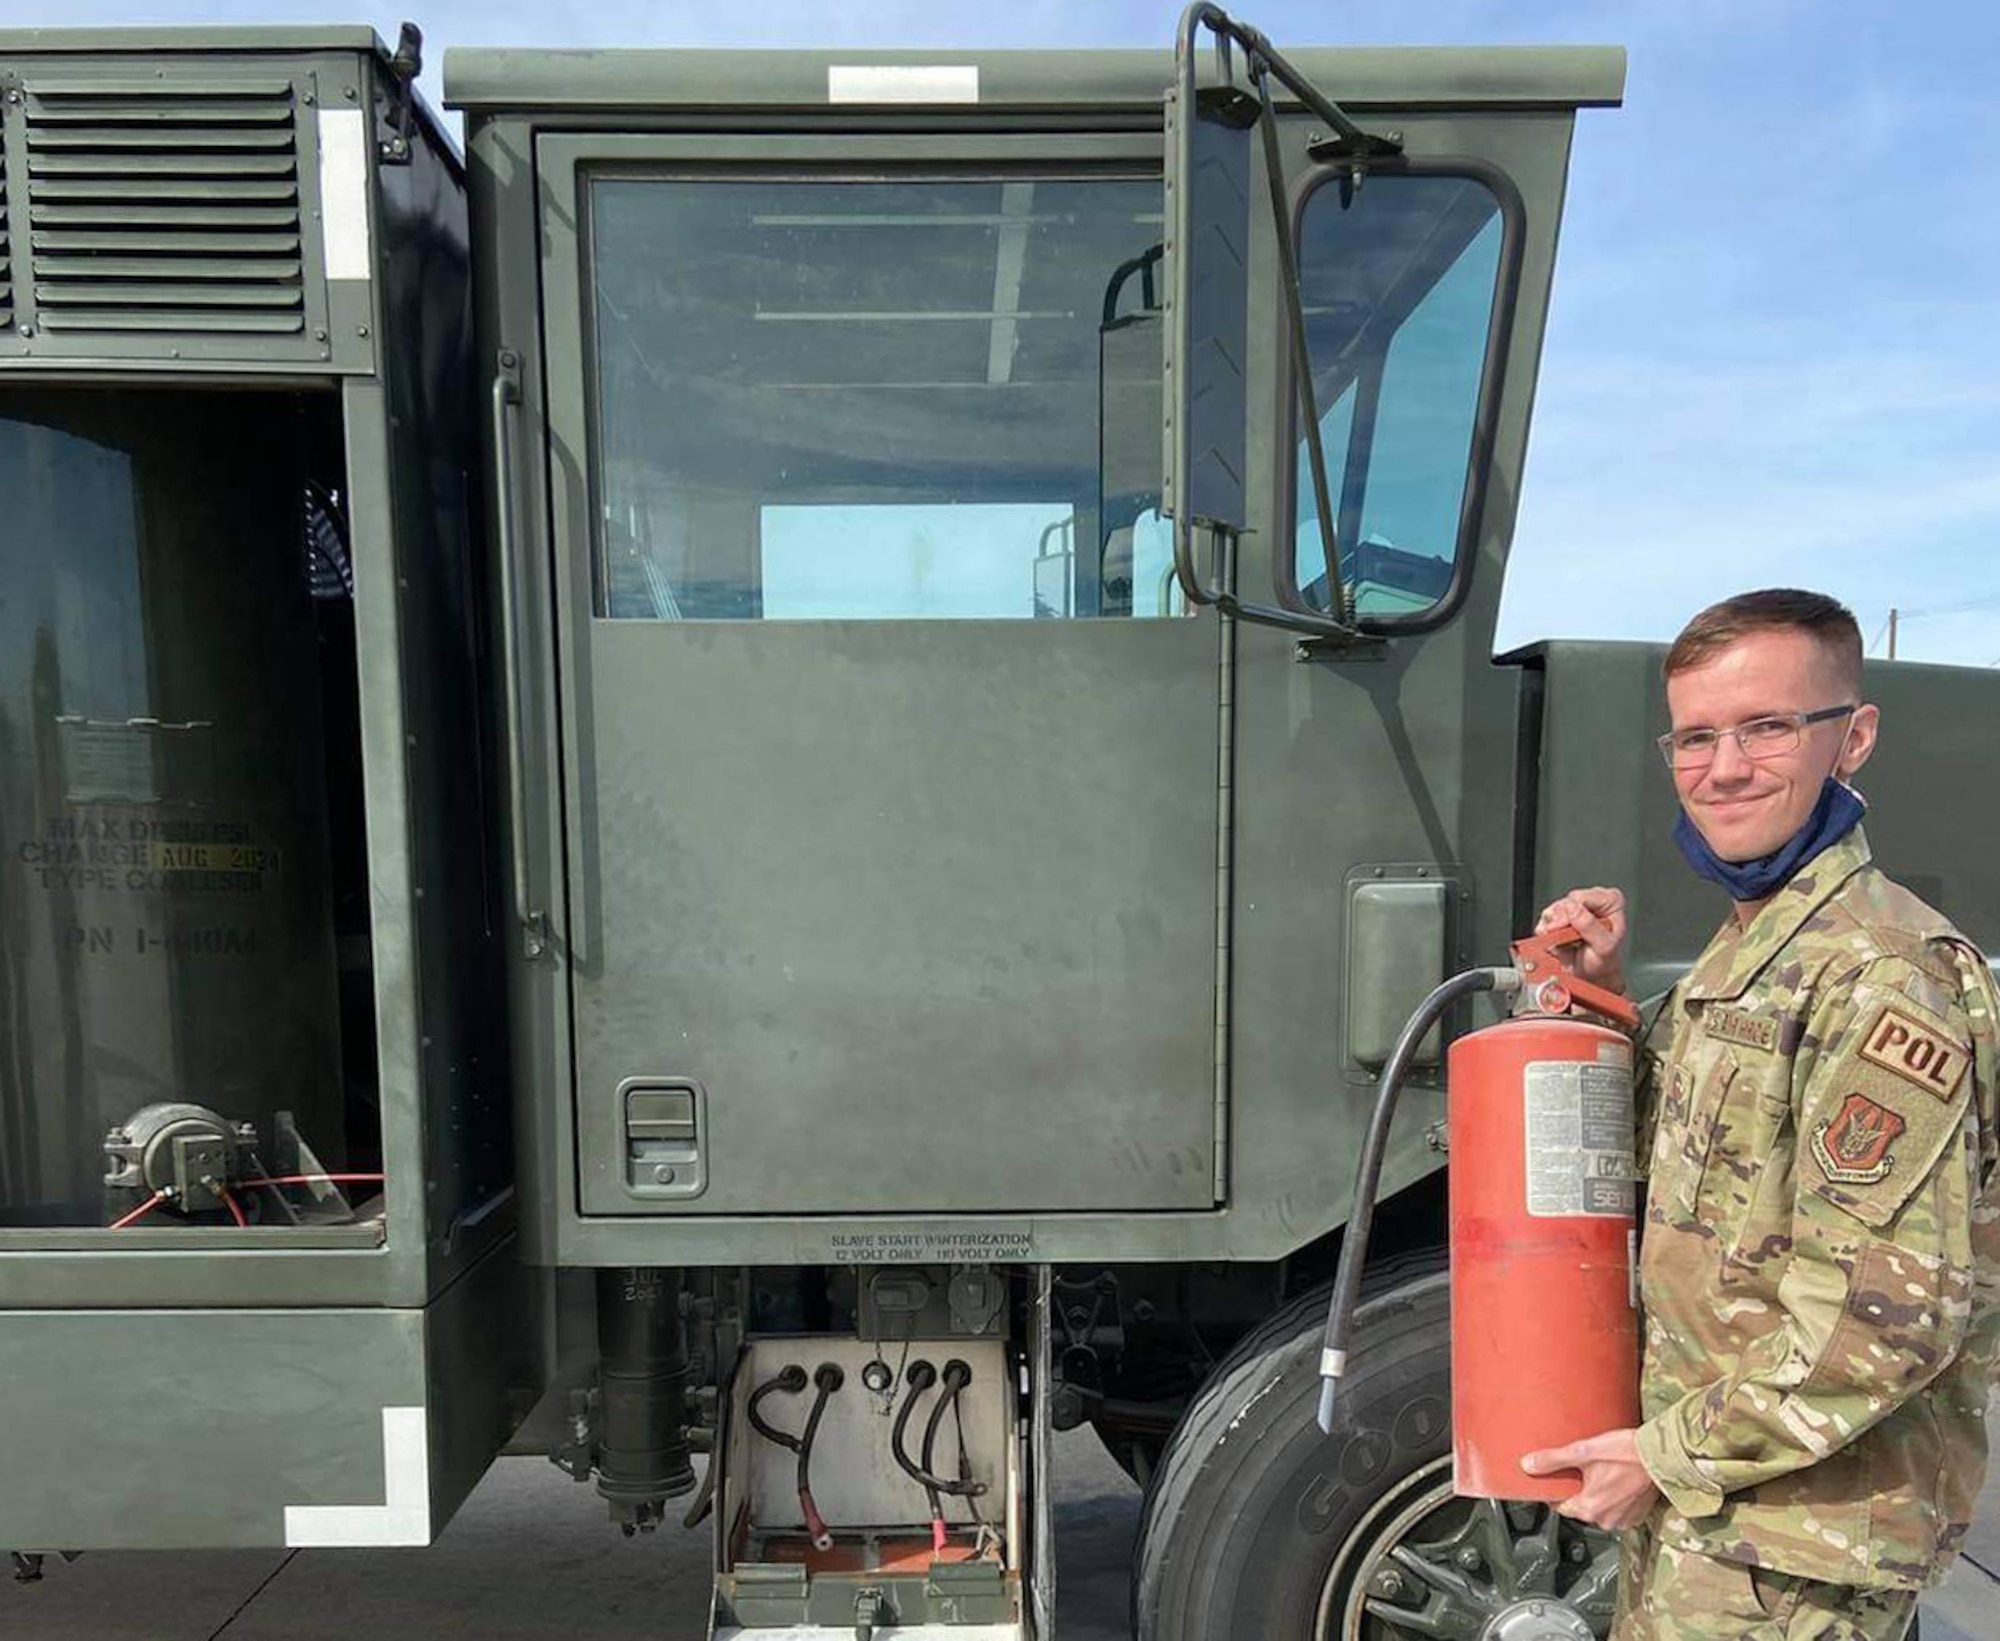 Senior Airman Matthew Kunko, 301 FW Logistics Readiness Squadron fuels operations specialist, stands in front of the fuel delivery truck with the fire extinguisher he used to put out a vehicle fire at Naval Air Station Joint Reserve Base Fort Worth, Texas on Oct. 17, 2021. Kunko detected a burning smell burning he started one of the LRS fuel delivery trucks and extinguished the fire saving the truck and potentially two additional lives. (courtesy photo)